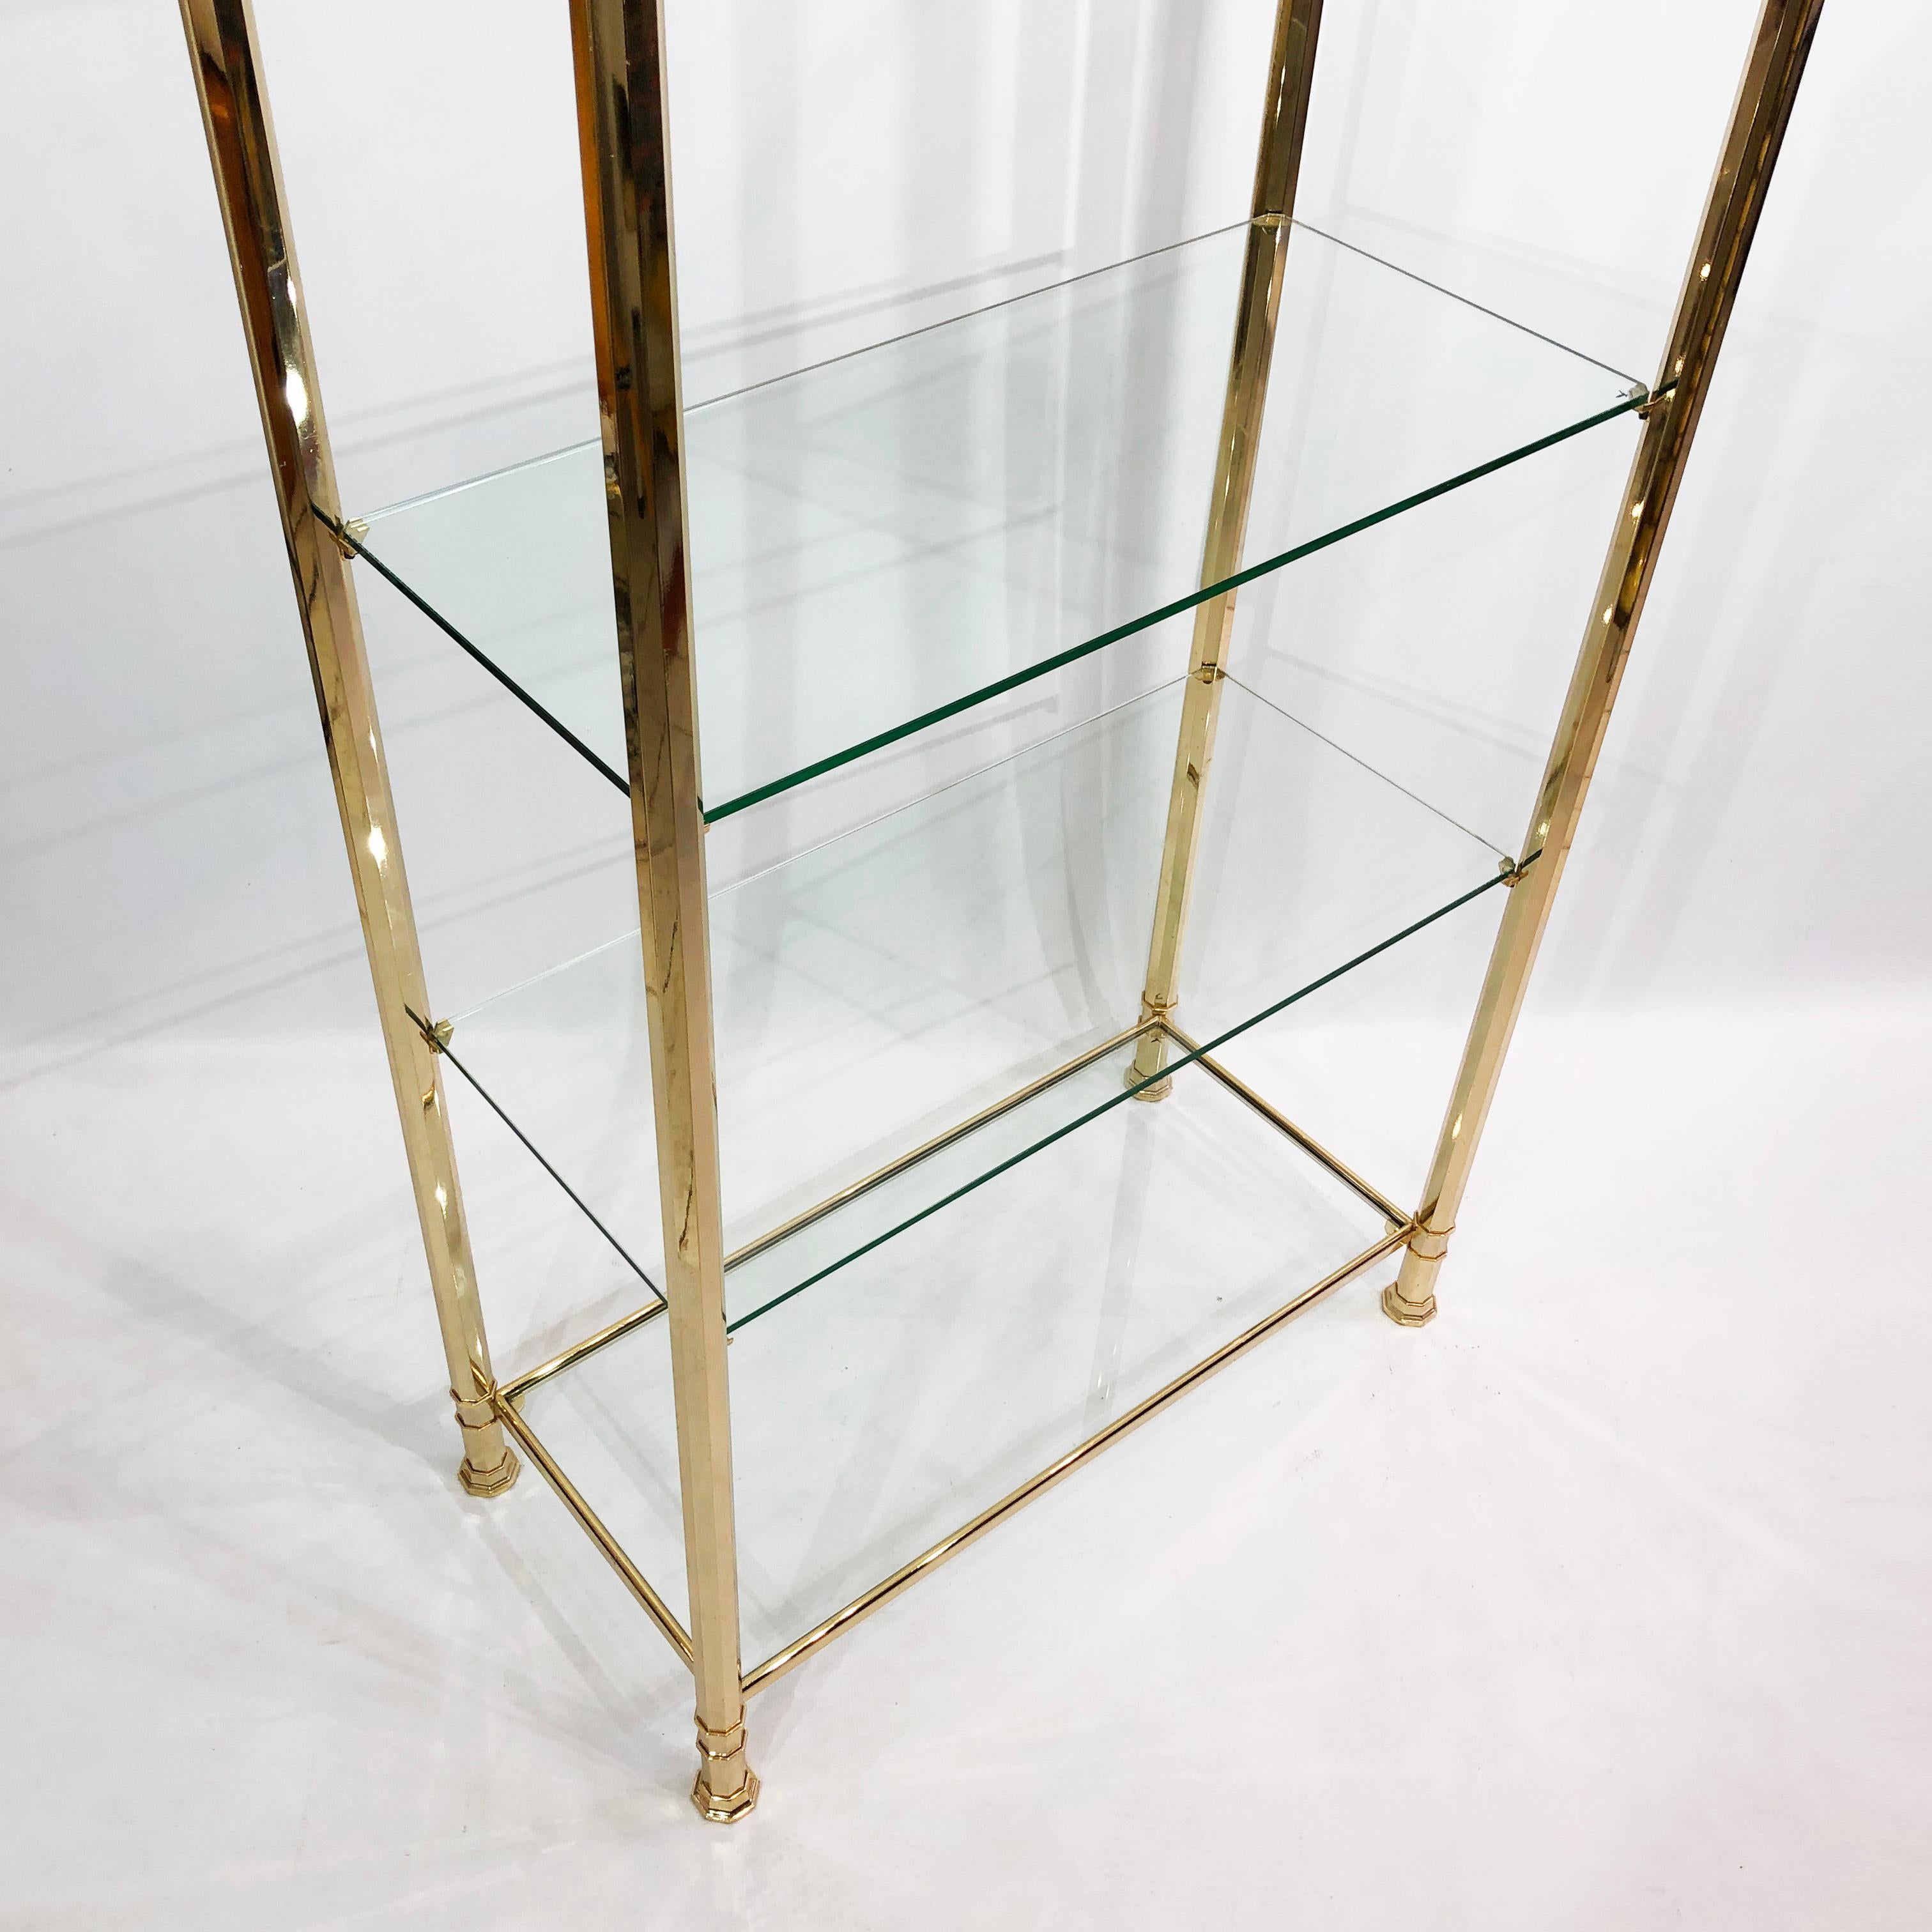 Plated Kesterport Gold Glass Polygonal Etagere Brass Shelving 1980s Display Unit For Sale